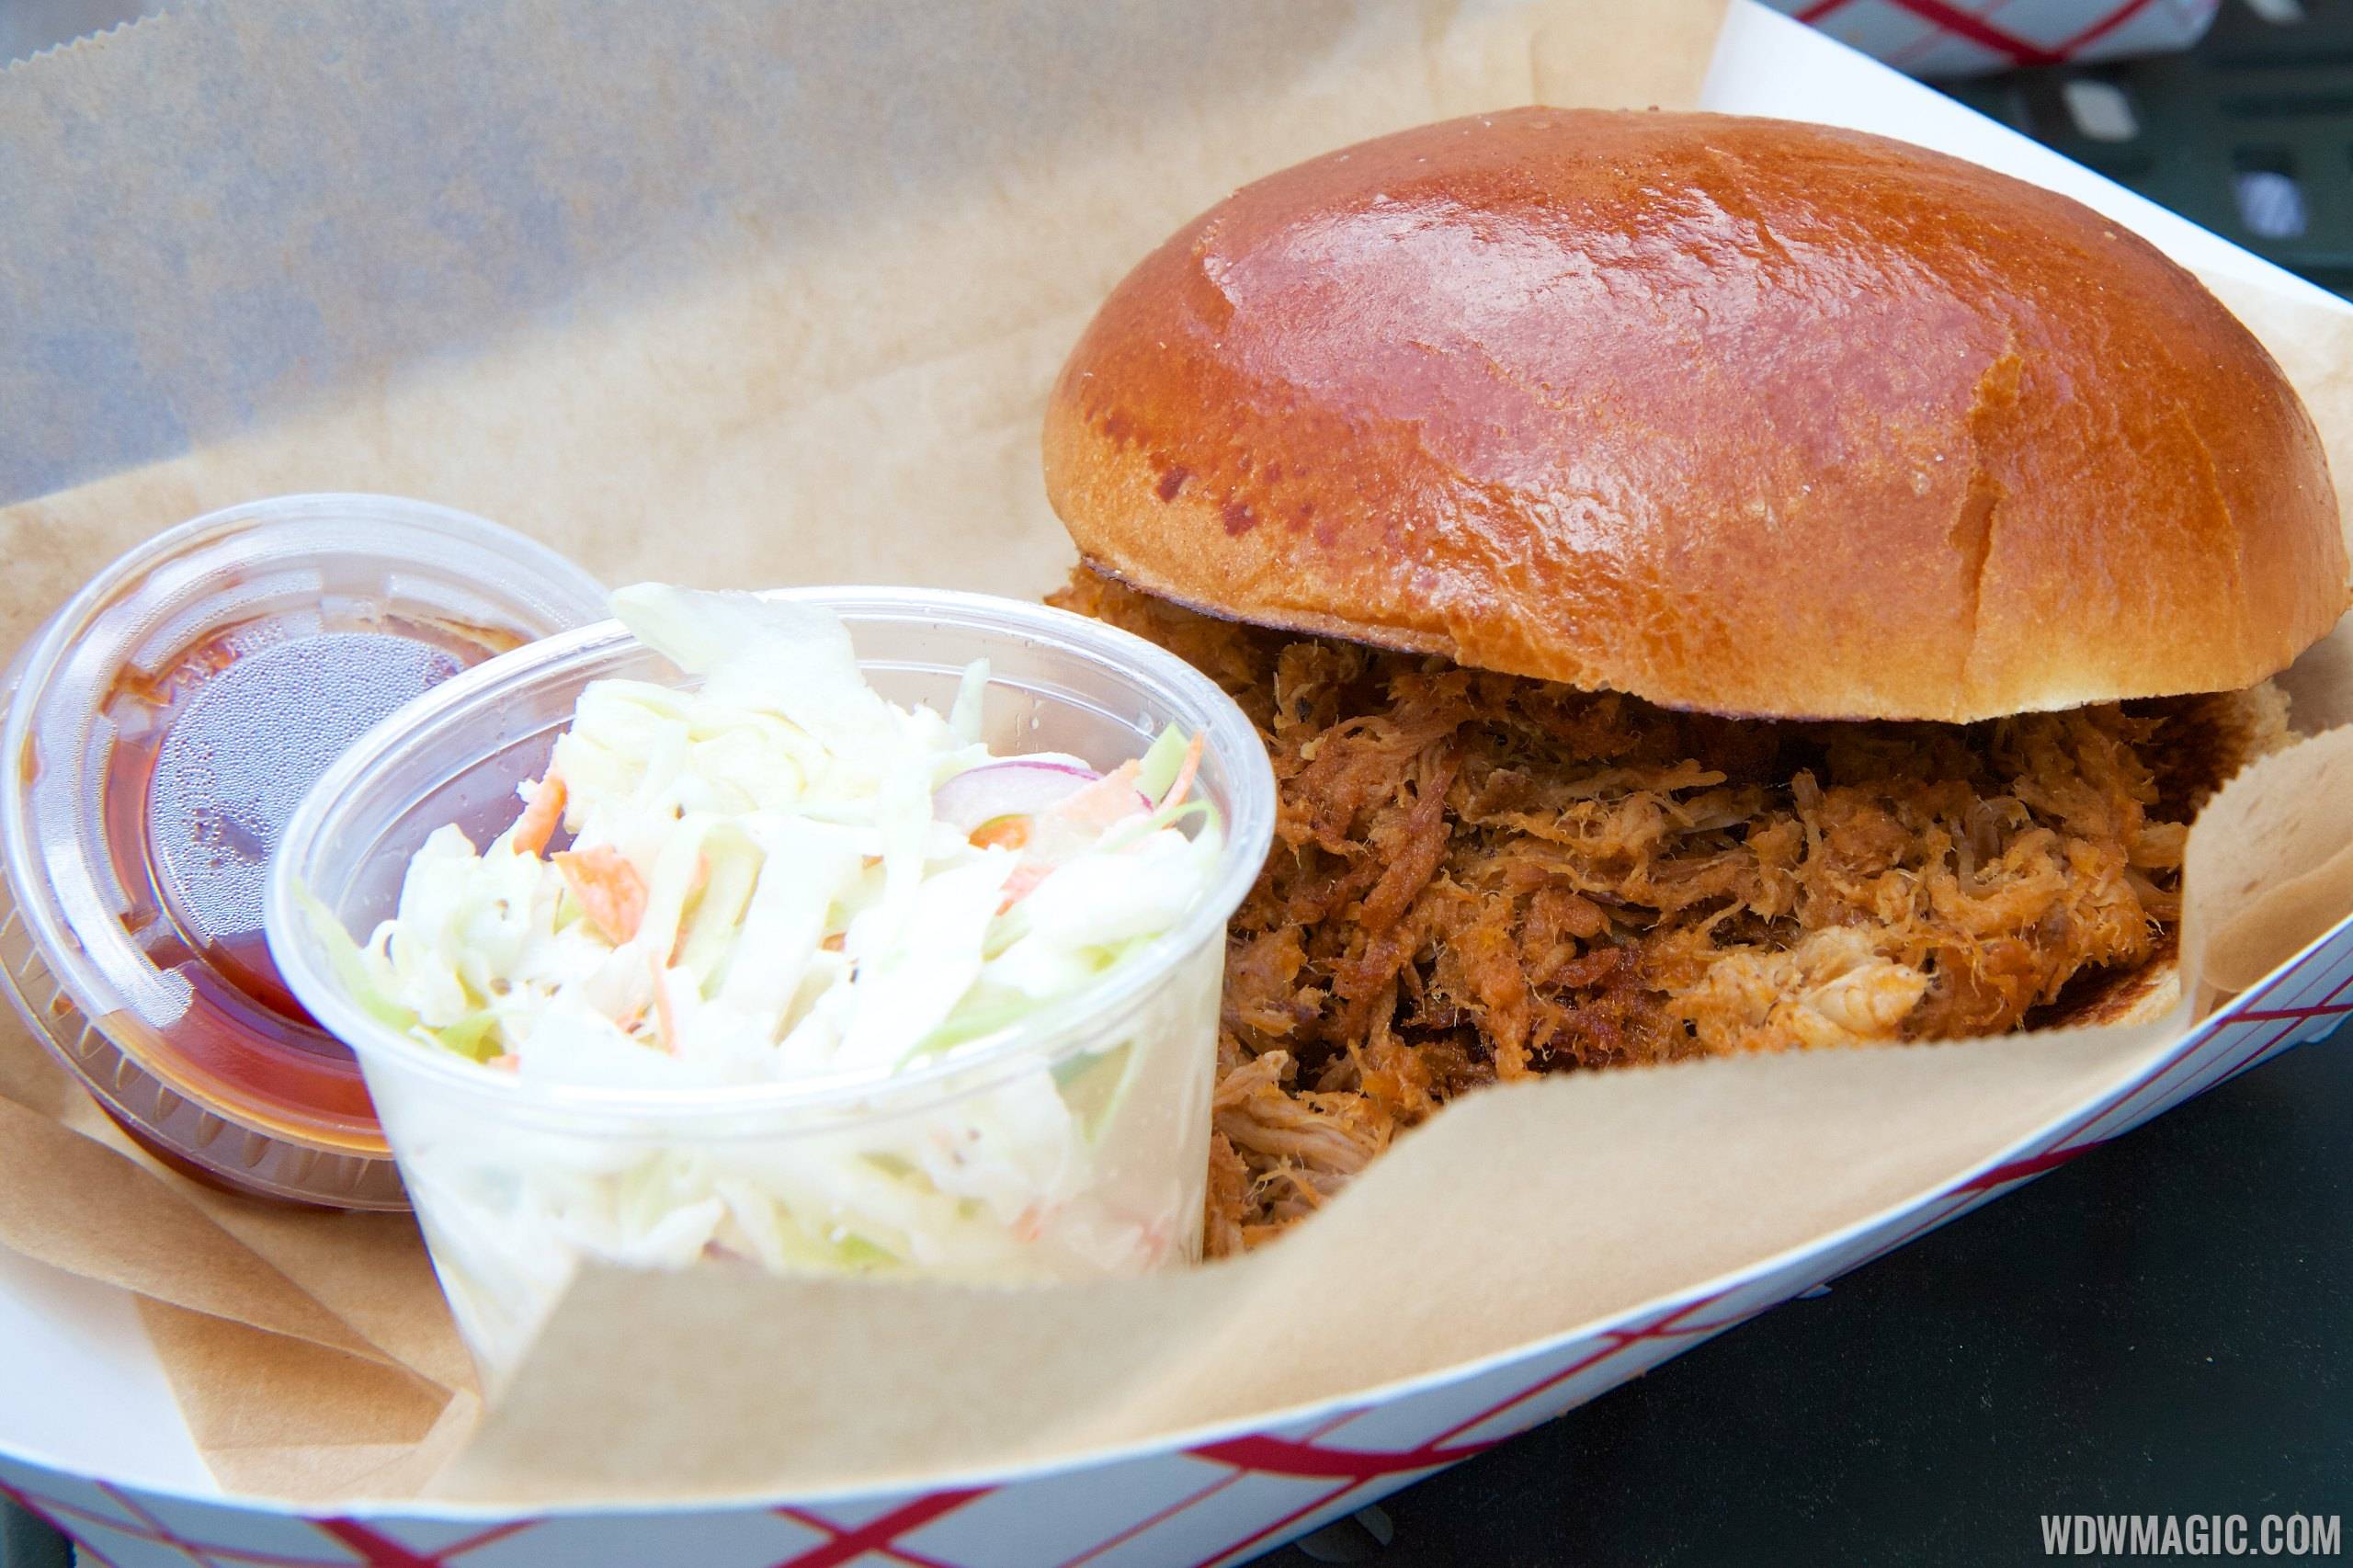 The Smokehouse - Pulled pork sandwich